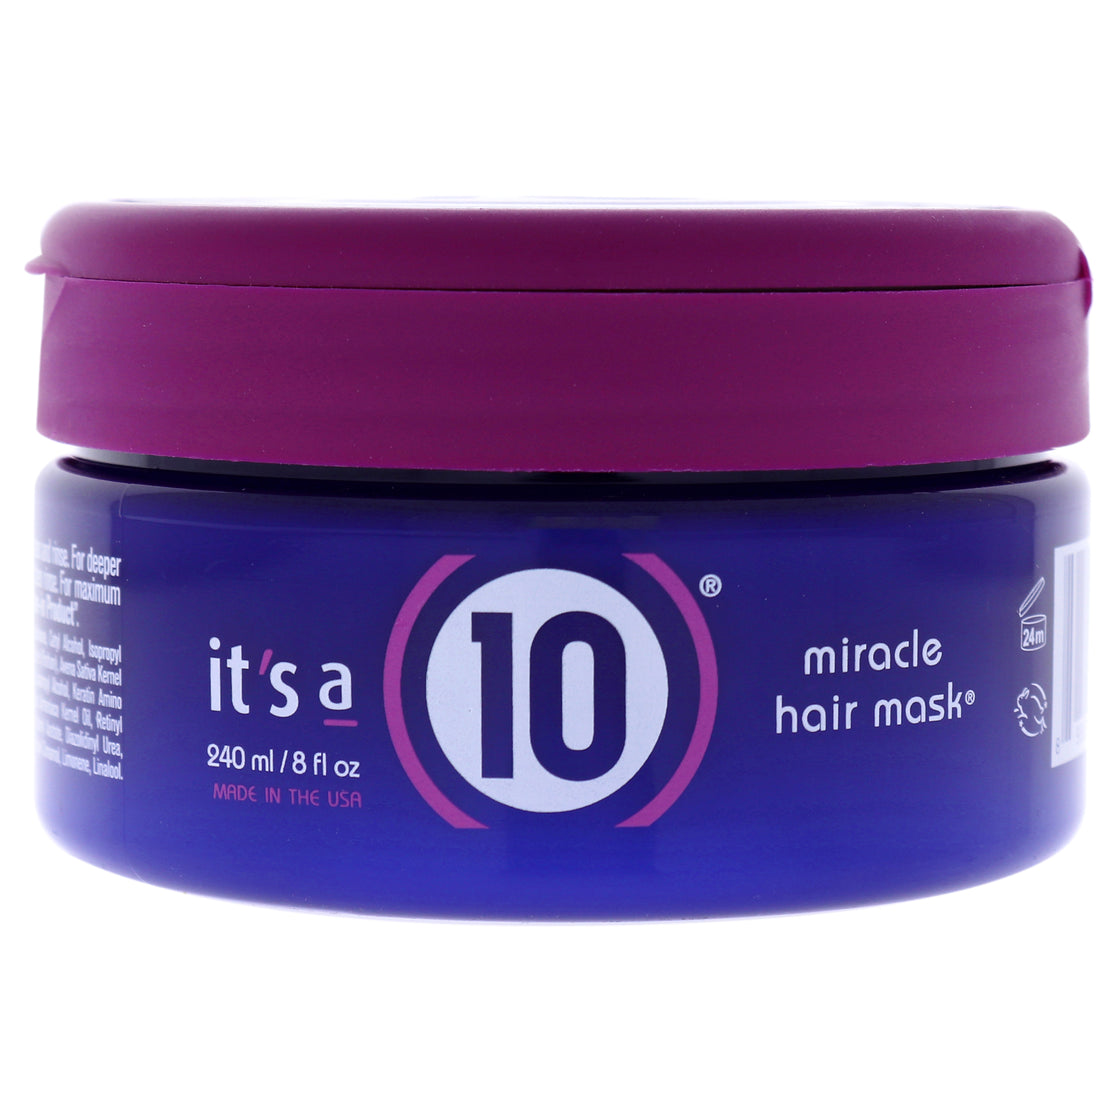 Miracle Hair Mask by Its A 10 for Unisex - 8 oz Mask